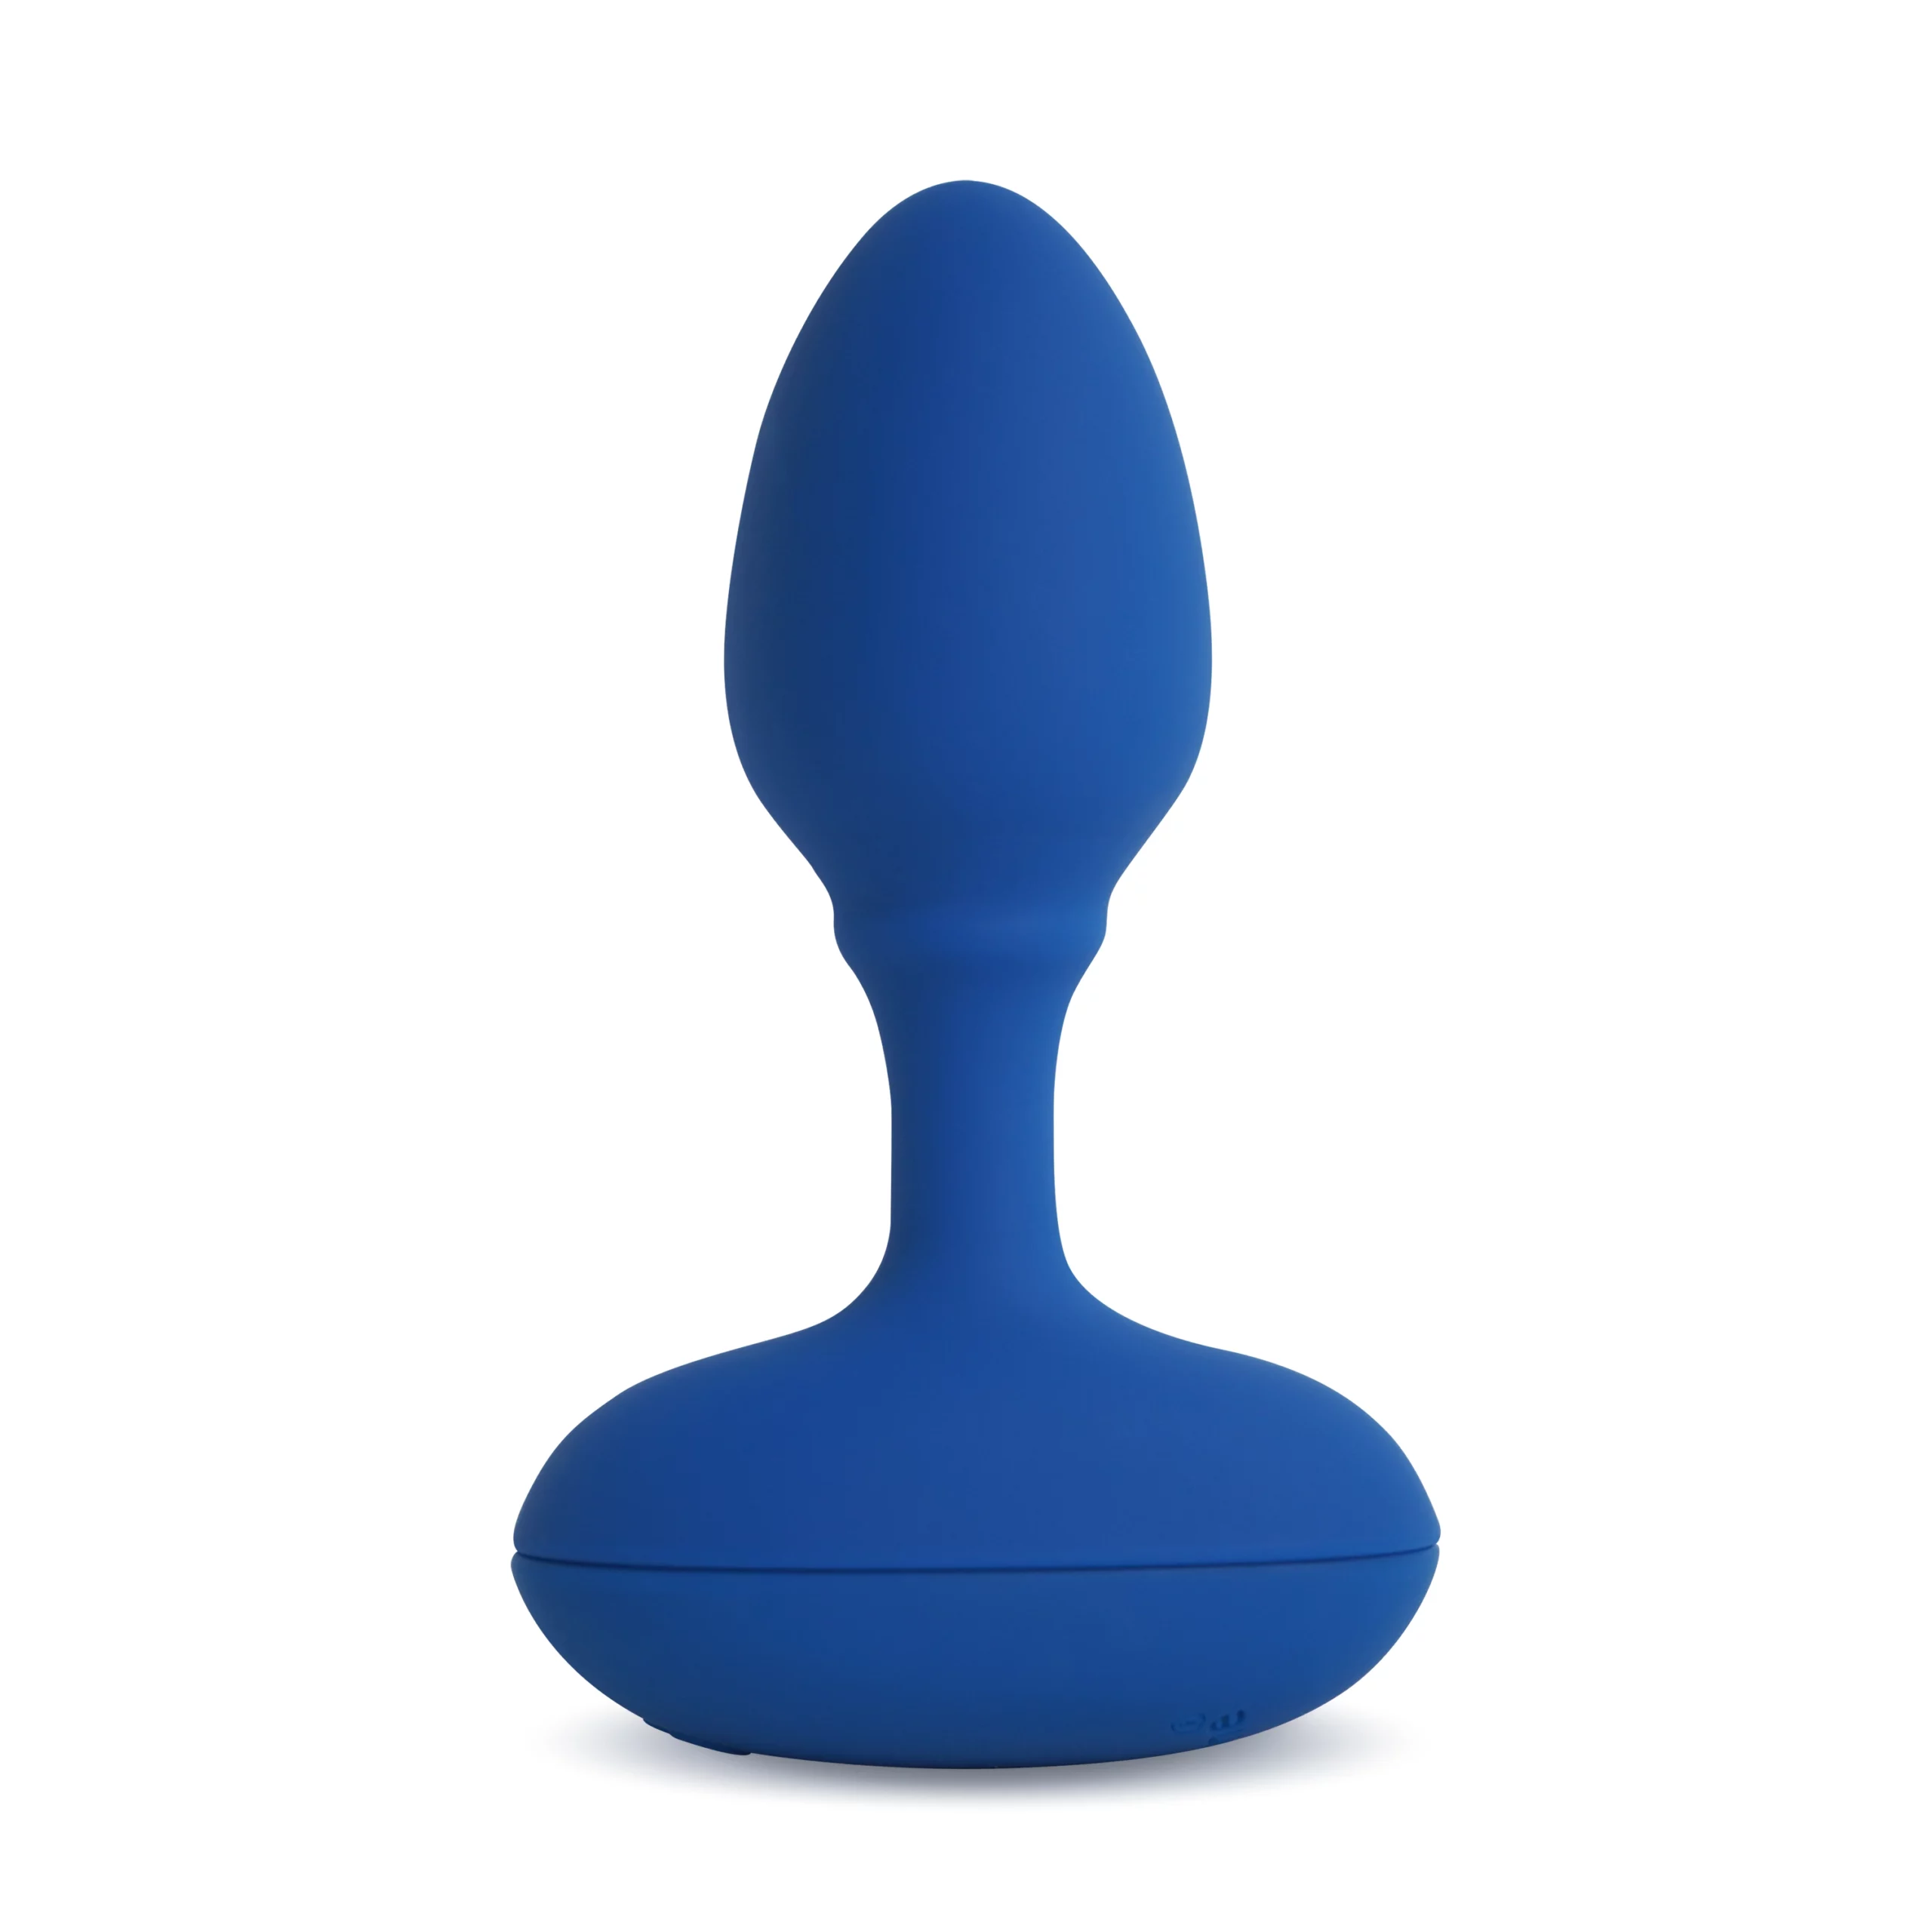 FreeSextoys here on X: Body-Safe Silicone Female Adult Toy Who would like  to try this one? Pls Dm me~  / X